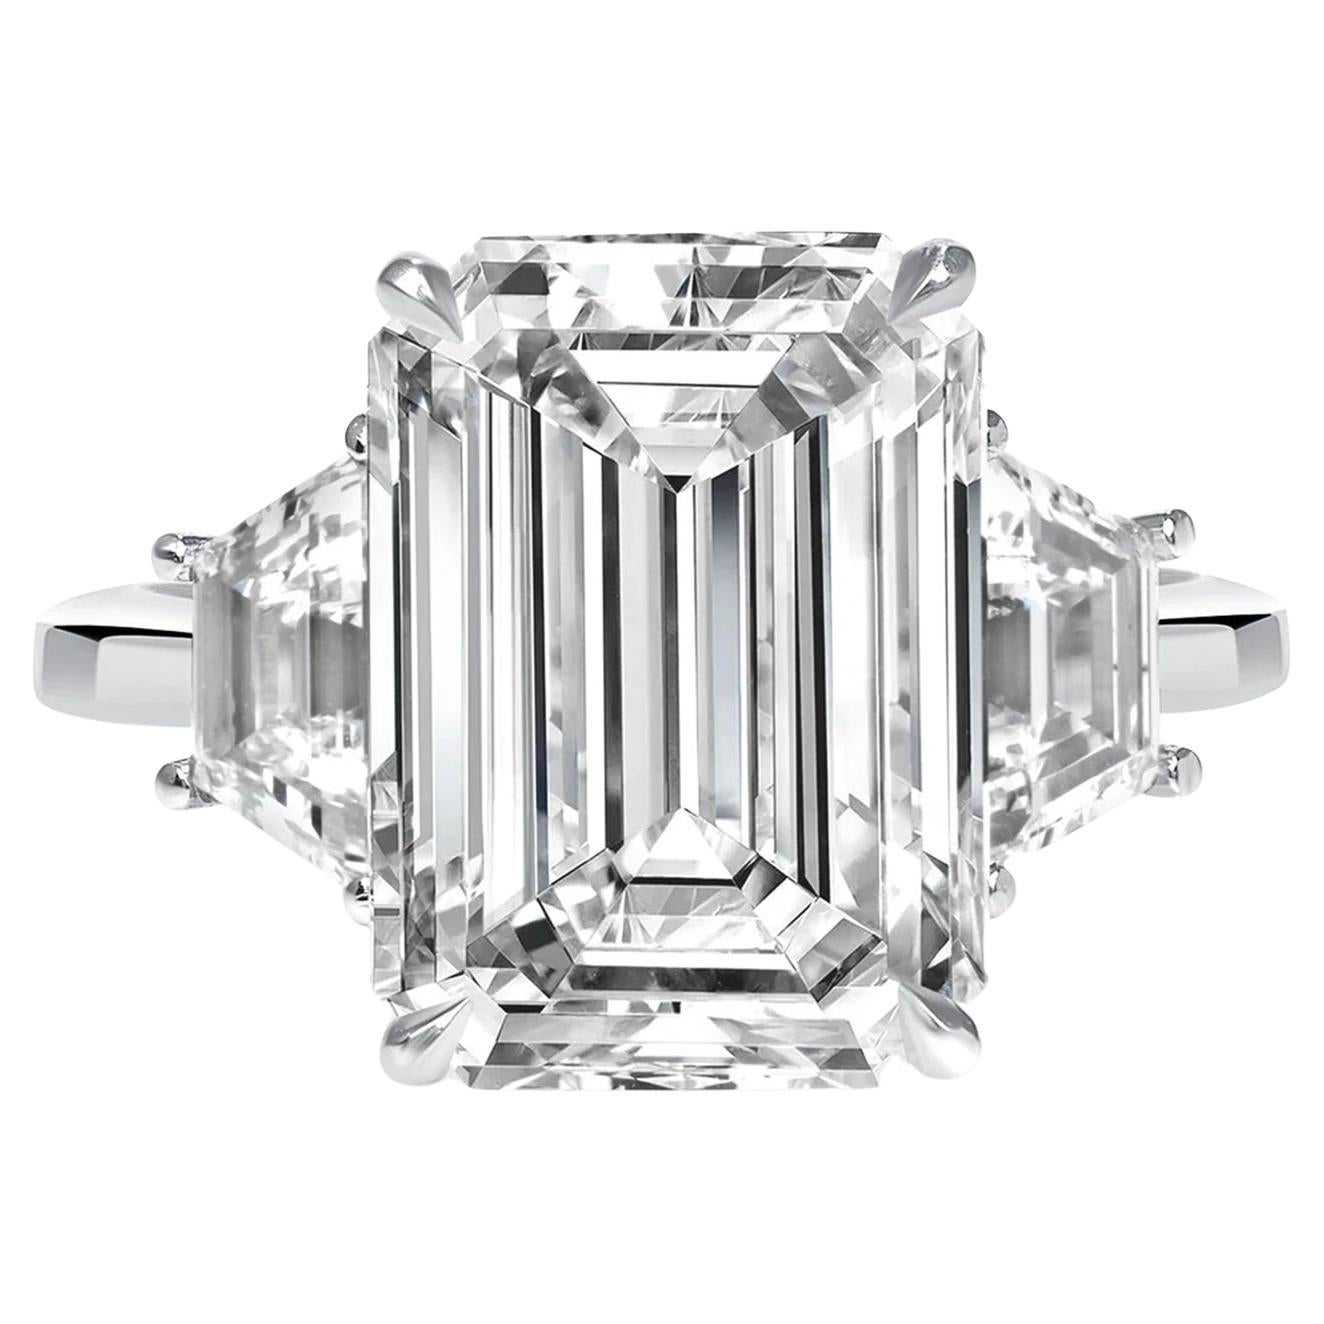 This exquisite piece by Antinori di Sanpietro elegantly presents a harmonious blend of classical beauty and modern craftsmanship. 

At the heart of this platinum ring sits a breathtaking 3 carat Emerald-cut diamond, certified by the Gemological